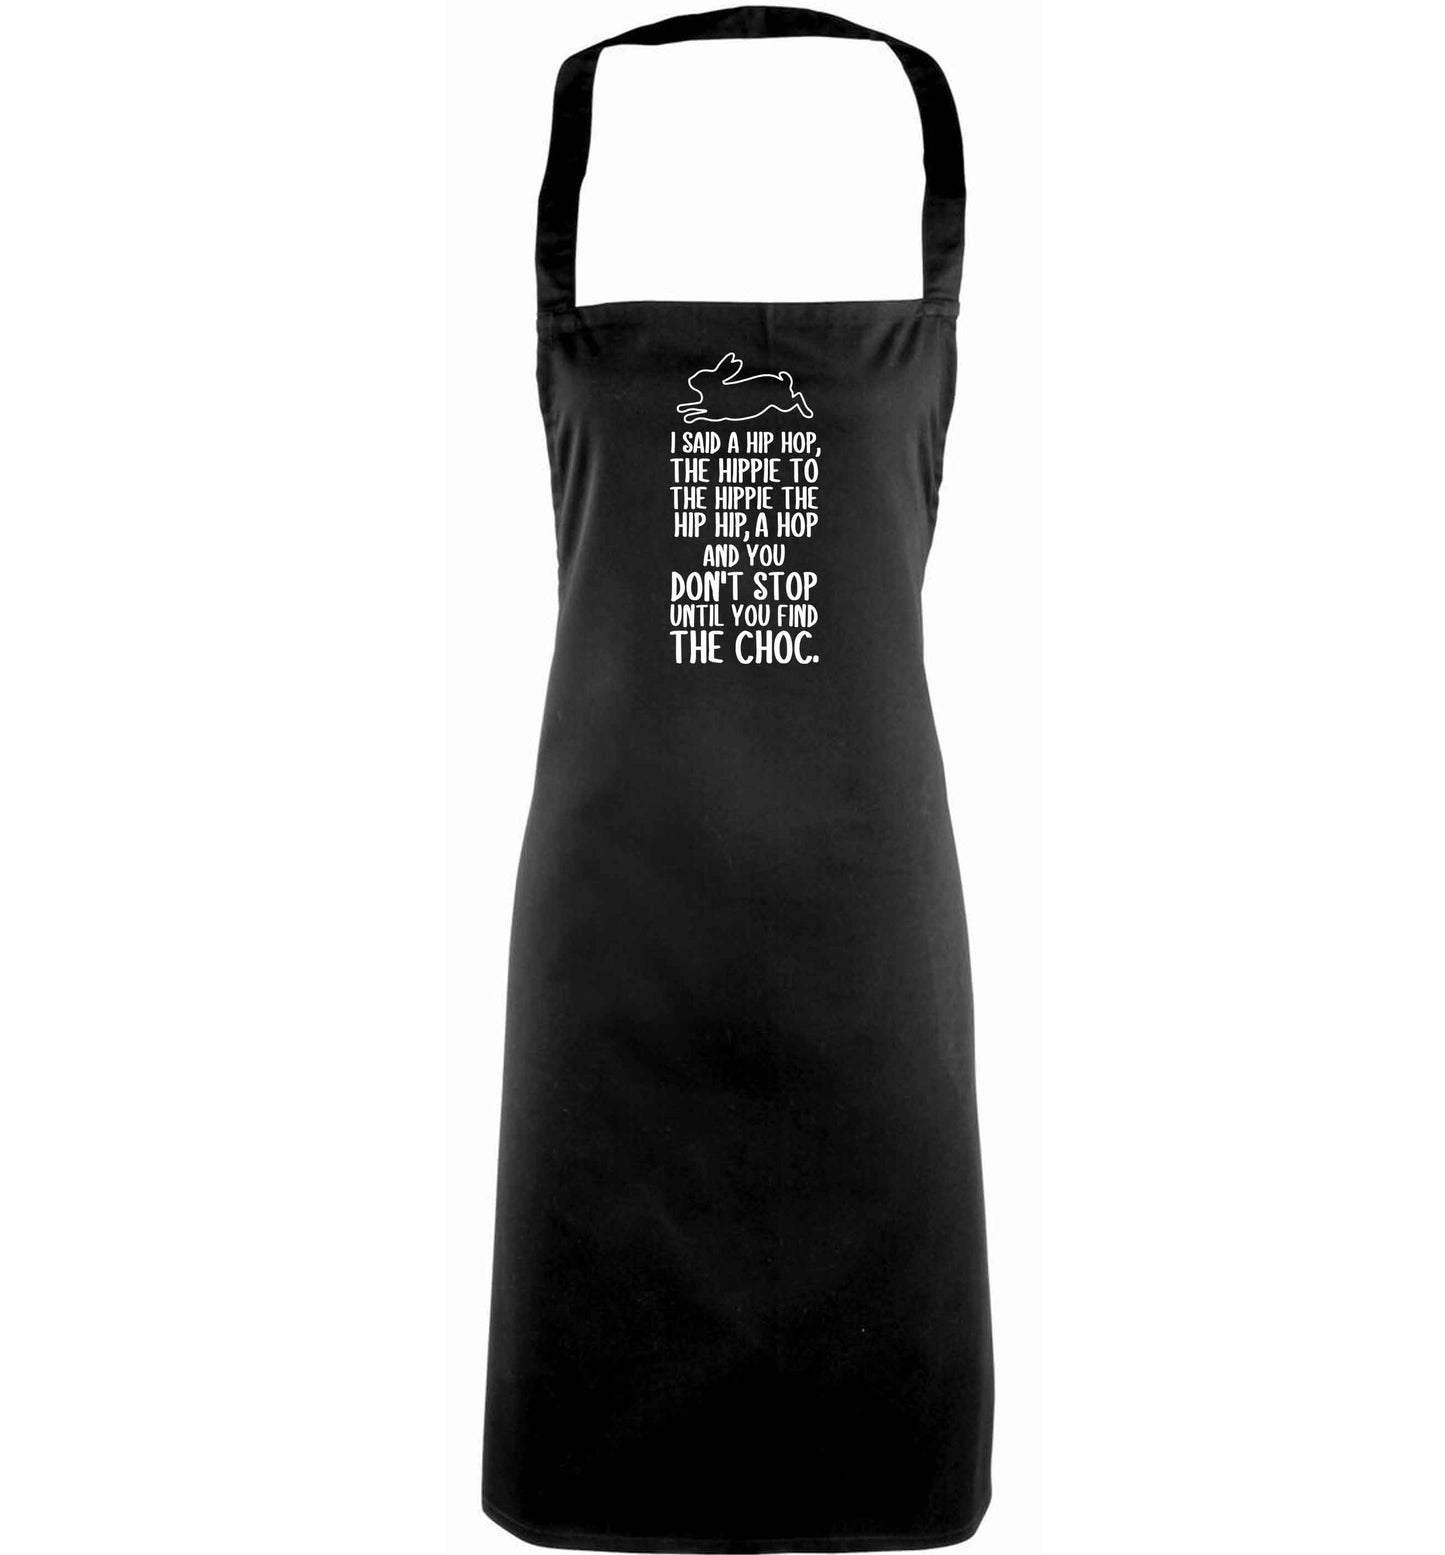 Don't stop until you find the choc adults black apron